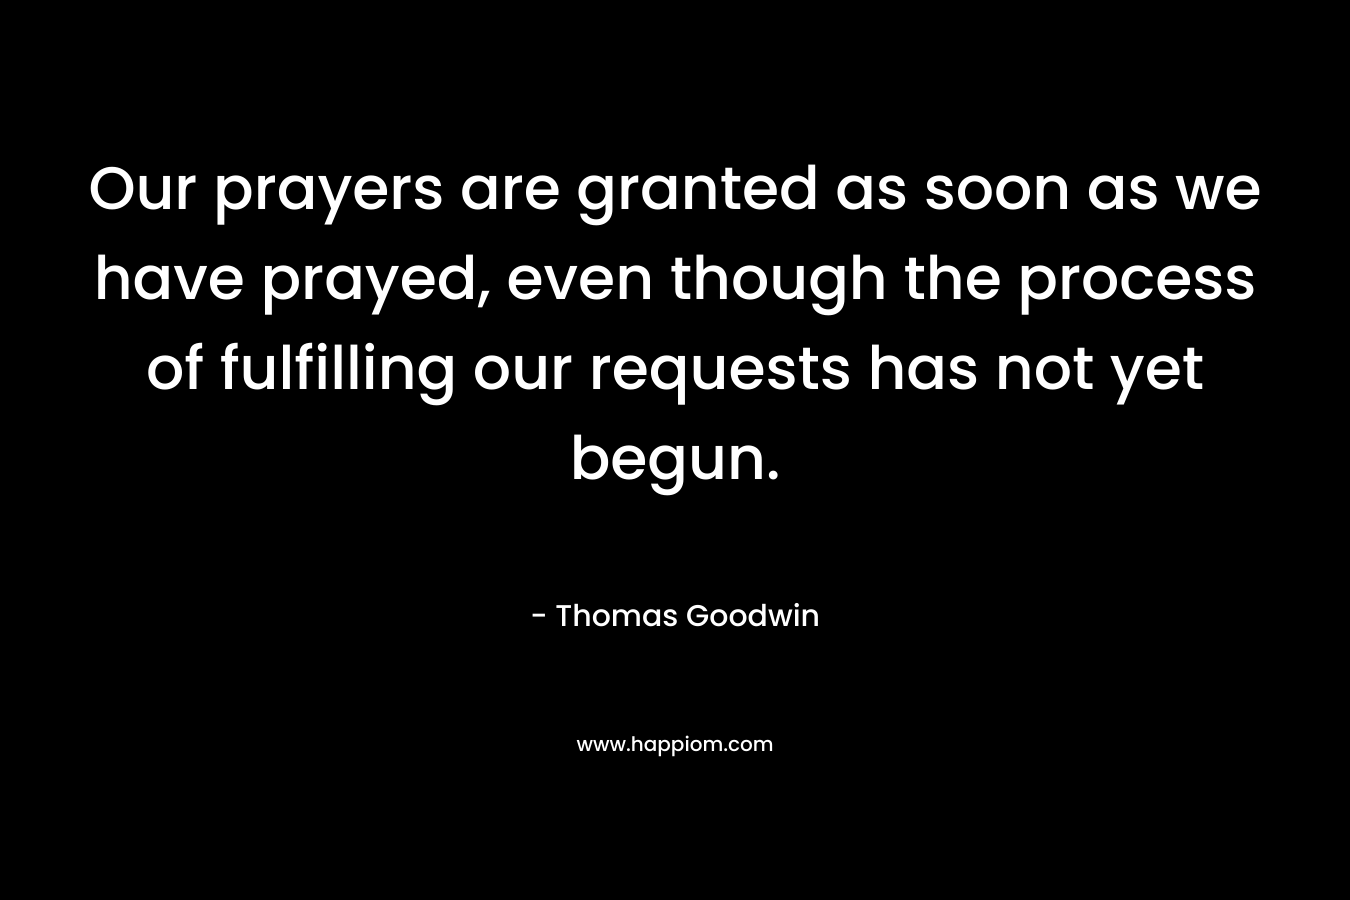 Our prayers are granted as soon as we have prayed, even though the process of fulfilling our requests has not yet begun. – Thomas Goodwin